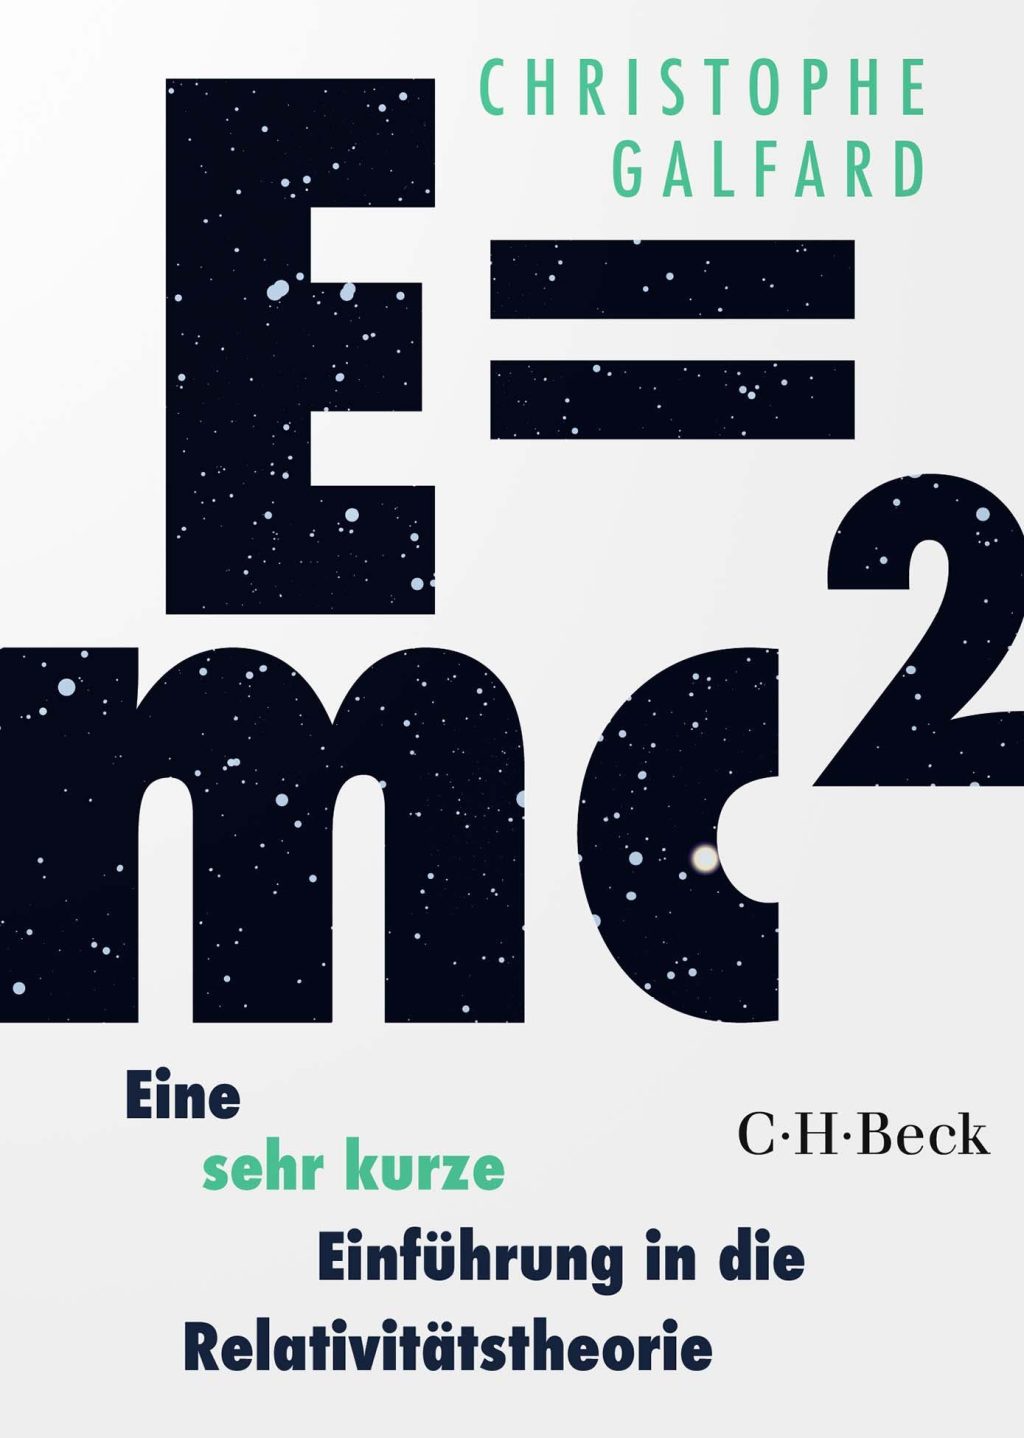 Review of the book “E = MC2” - Spectrum of Science